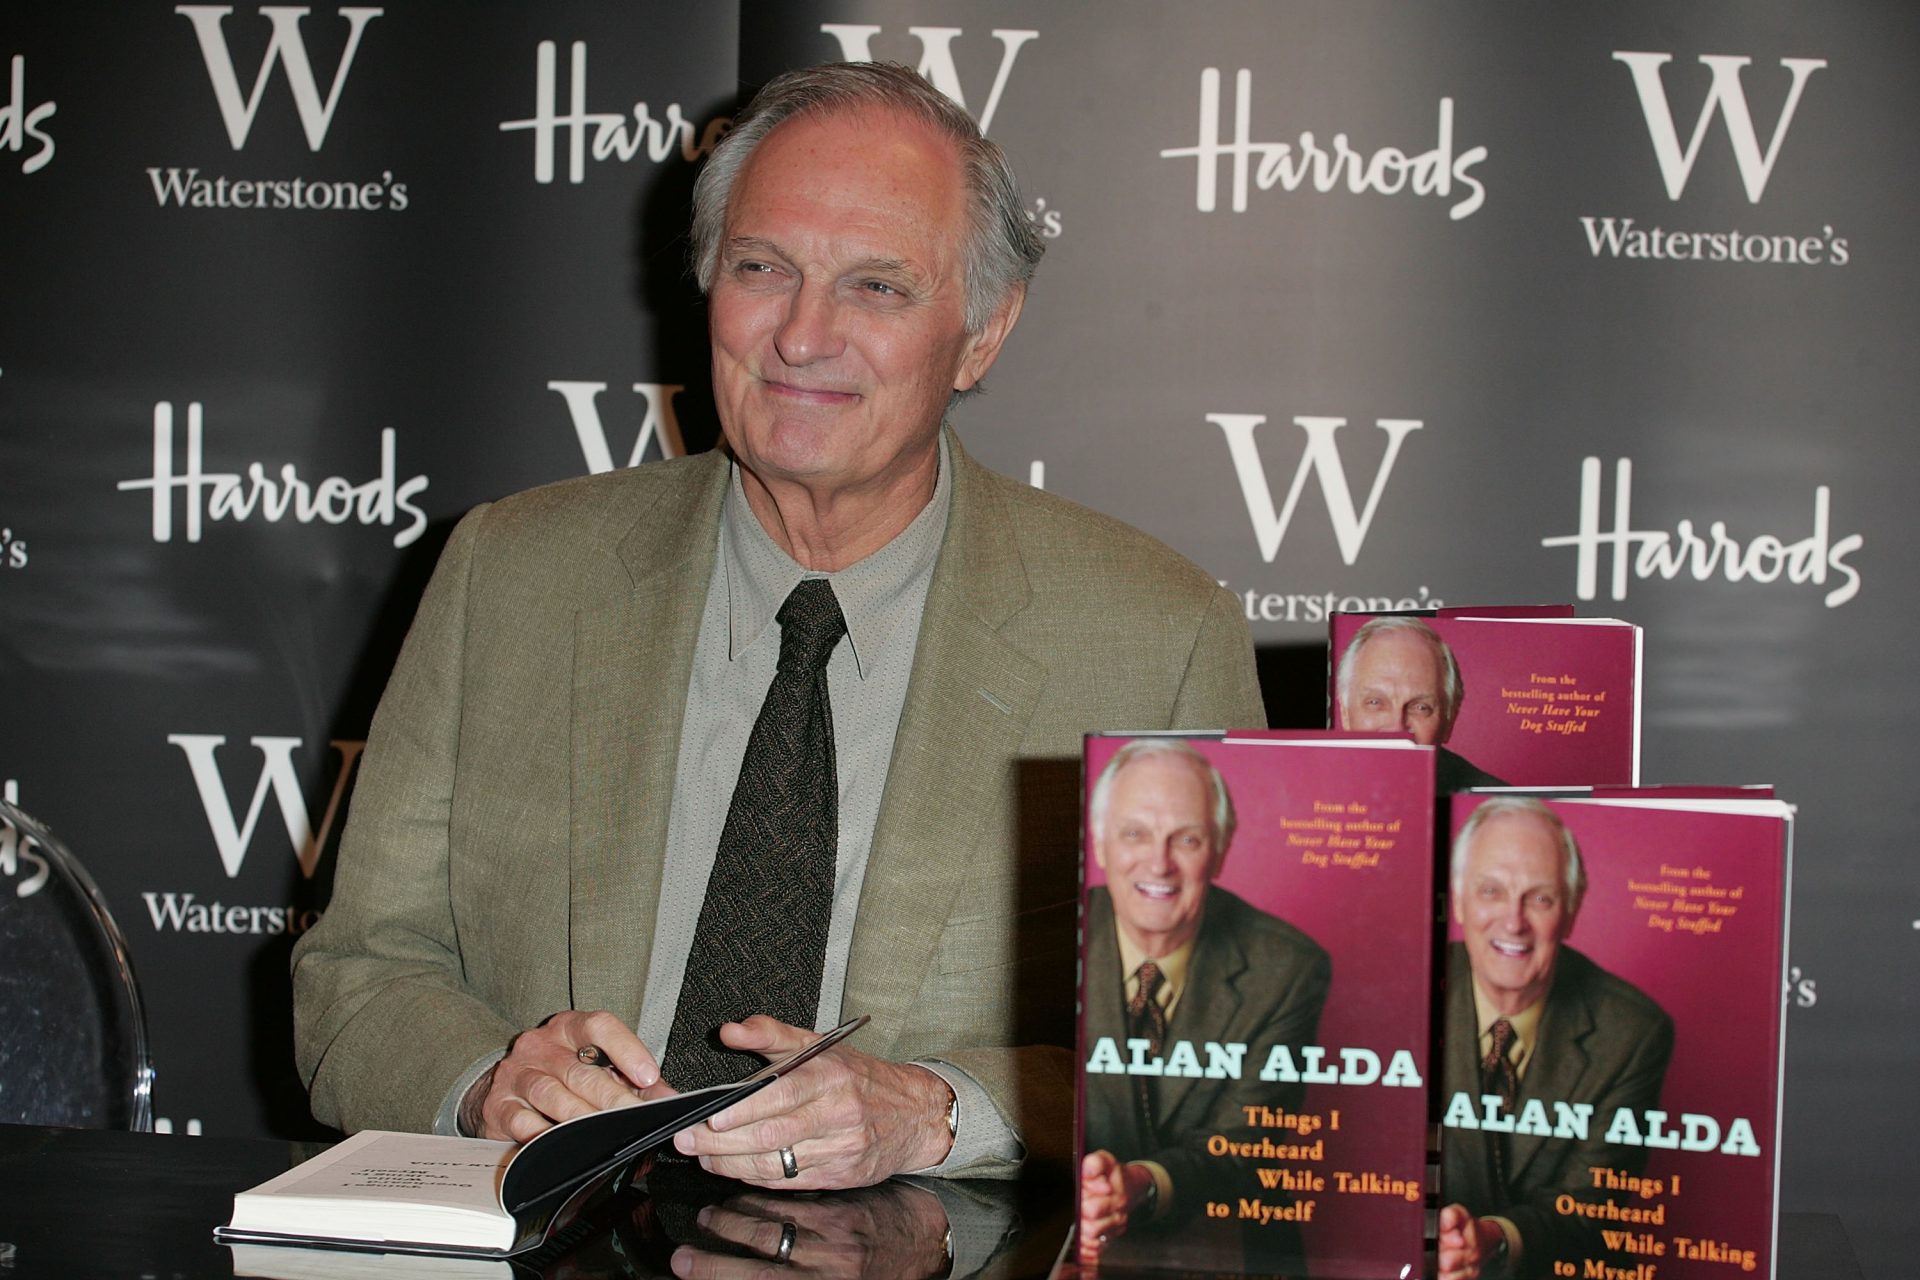 He wrote two additional memoirs in 2008 and 2017